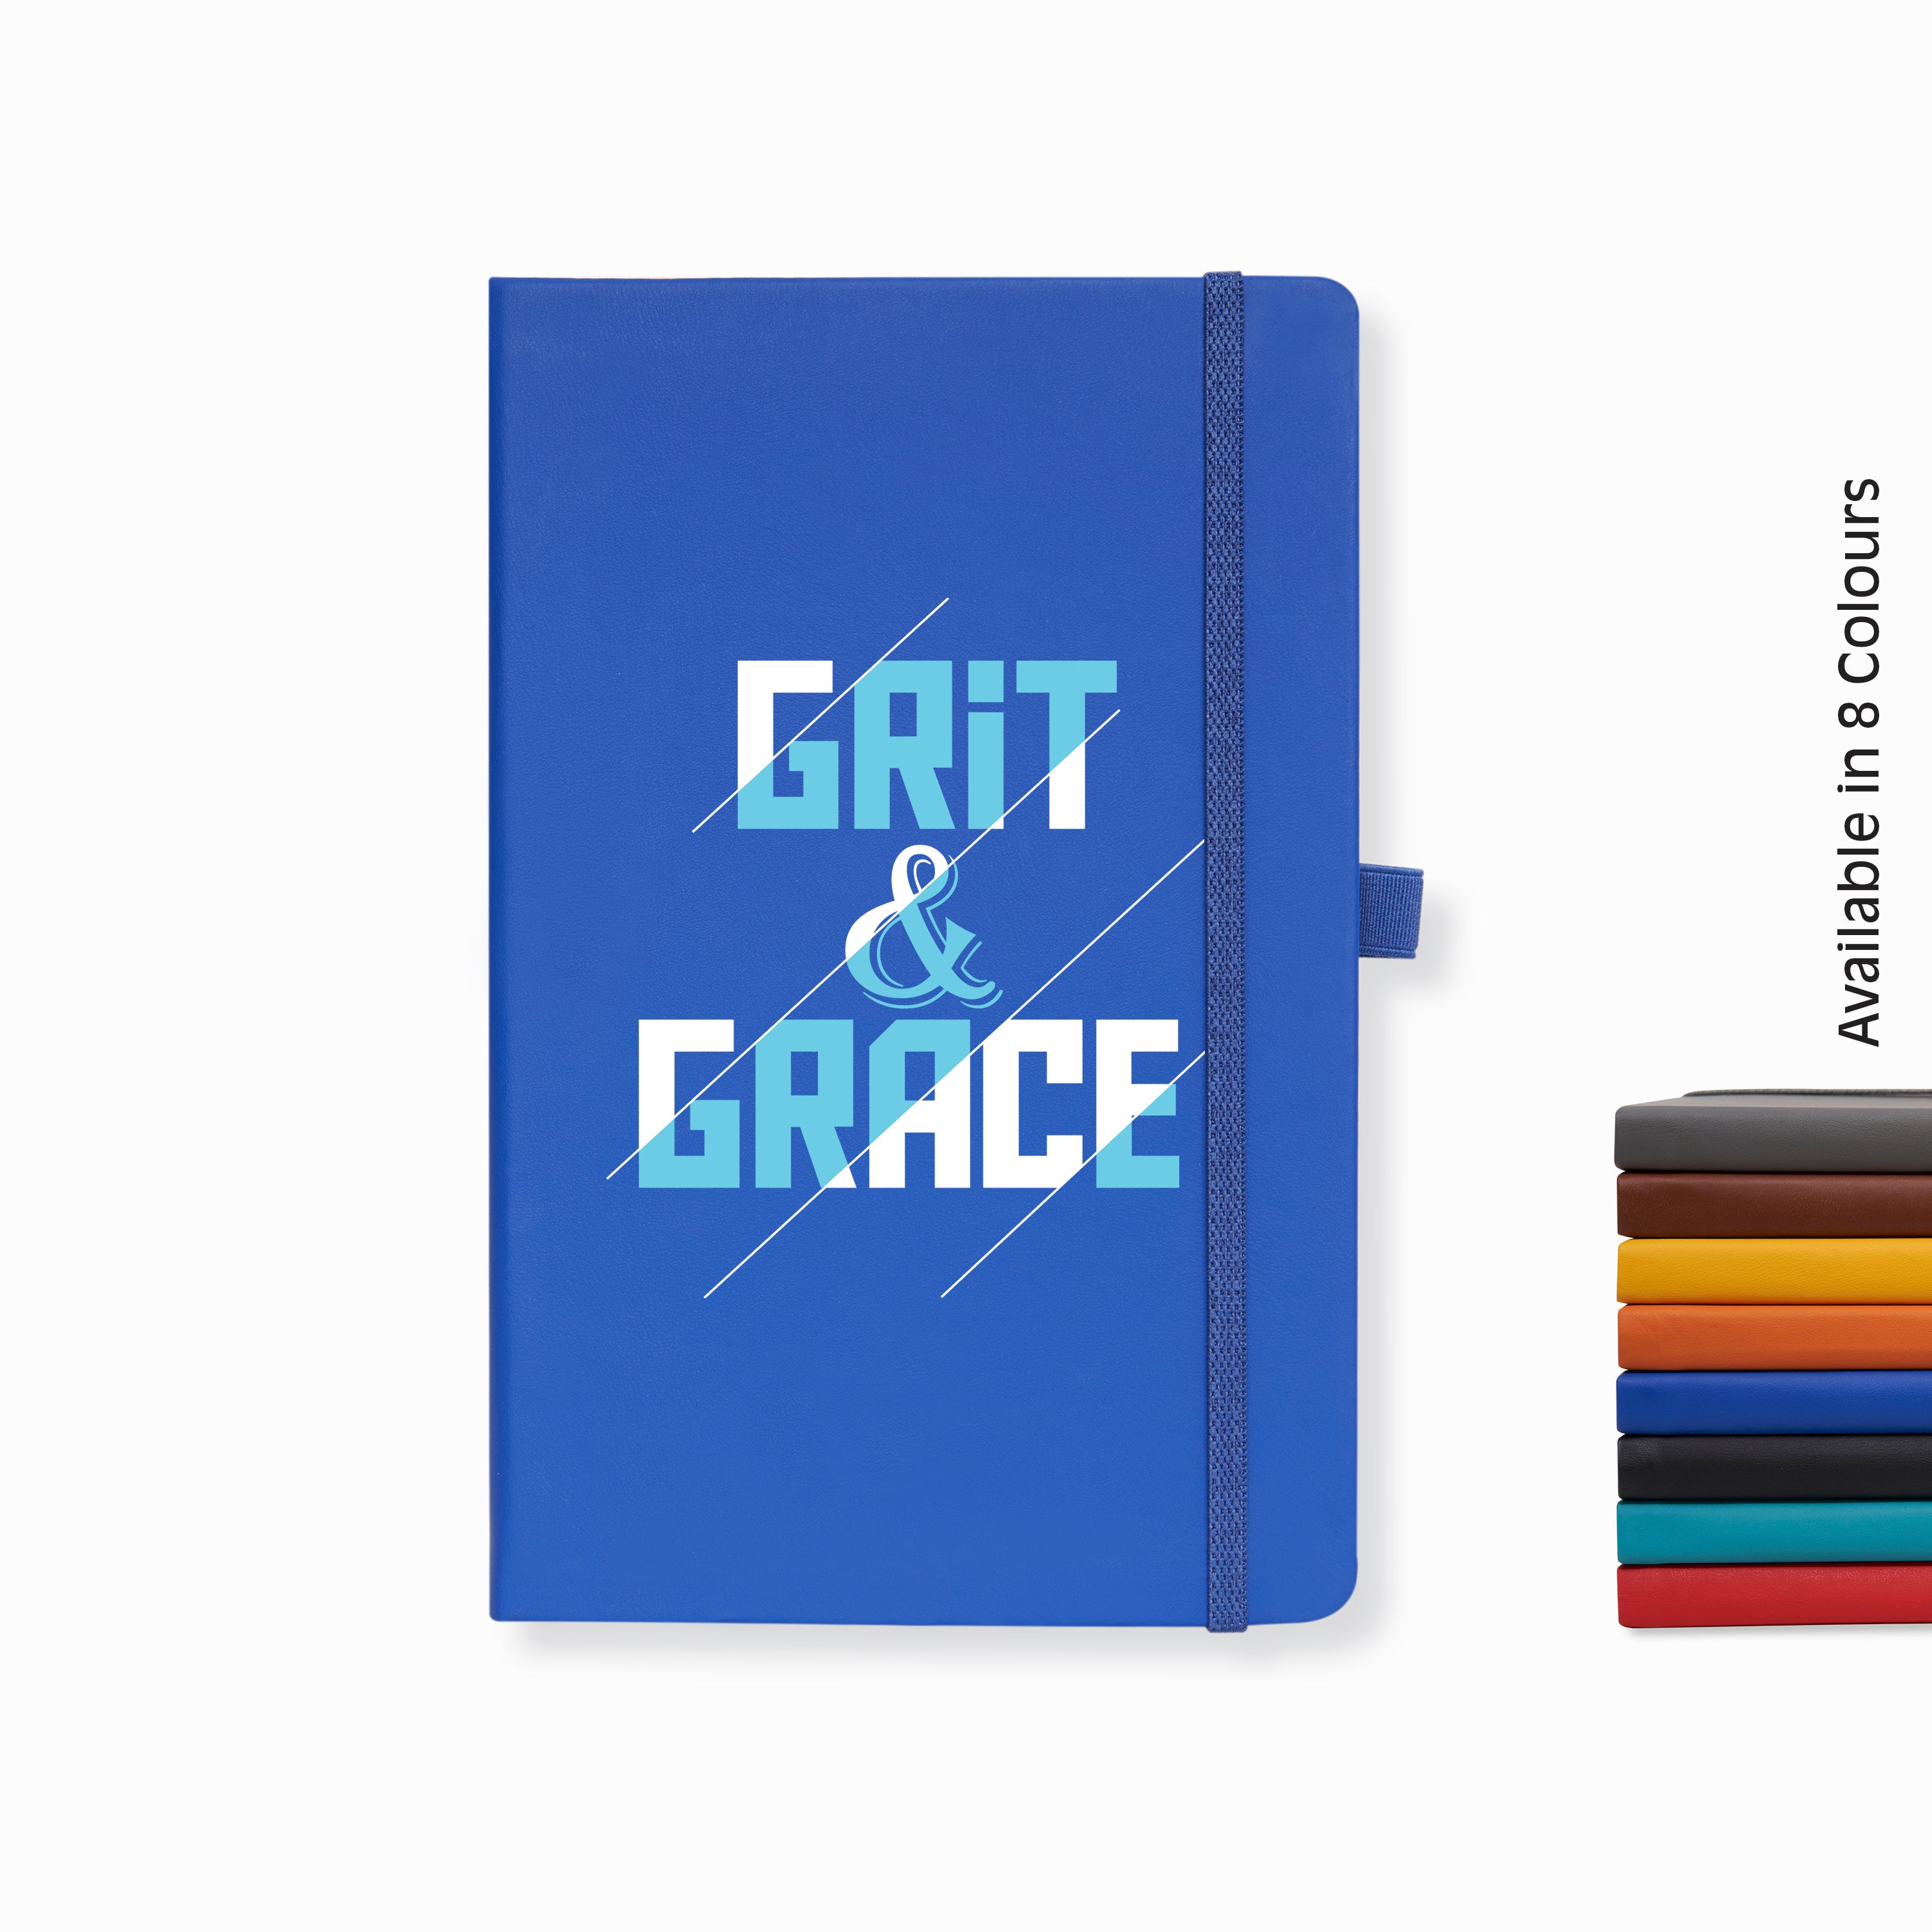 Doodle Pro Series Executive A5 PU Leather Hardbound Ruled Bright Blue Notebook with Pen Loop [Grit & Grace]